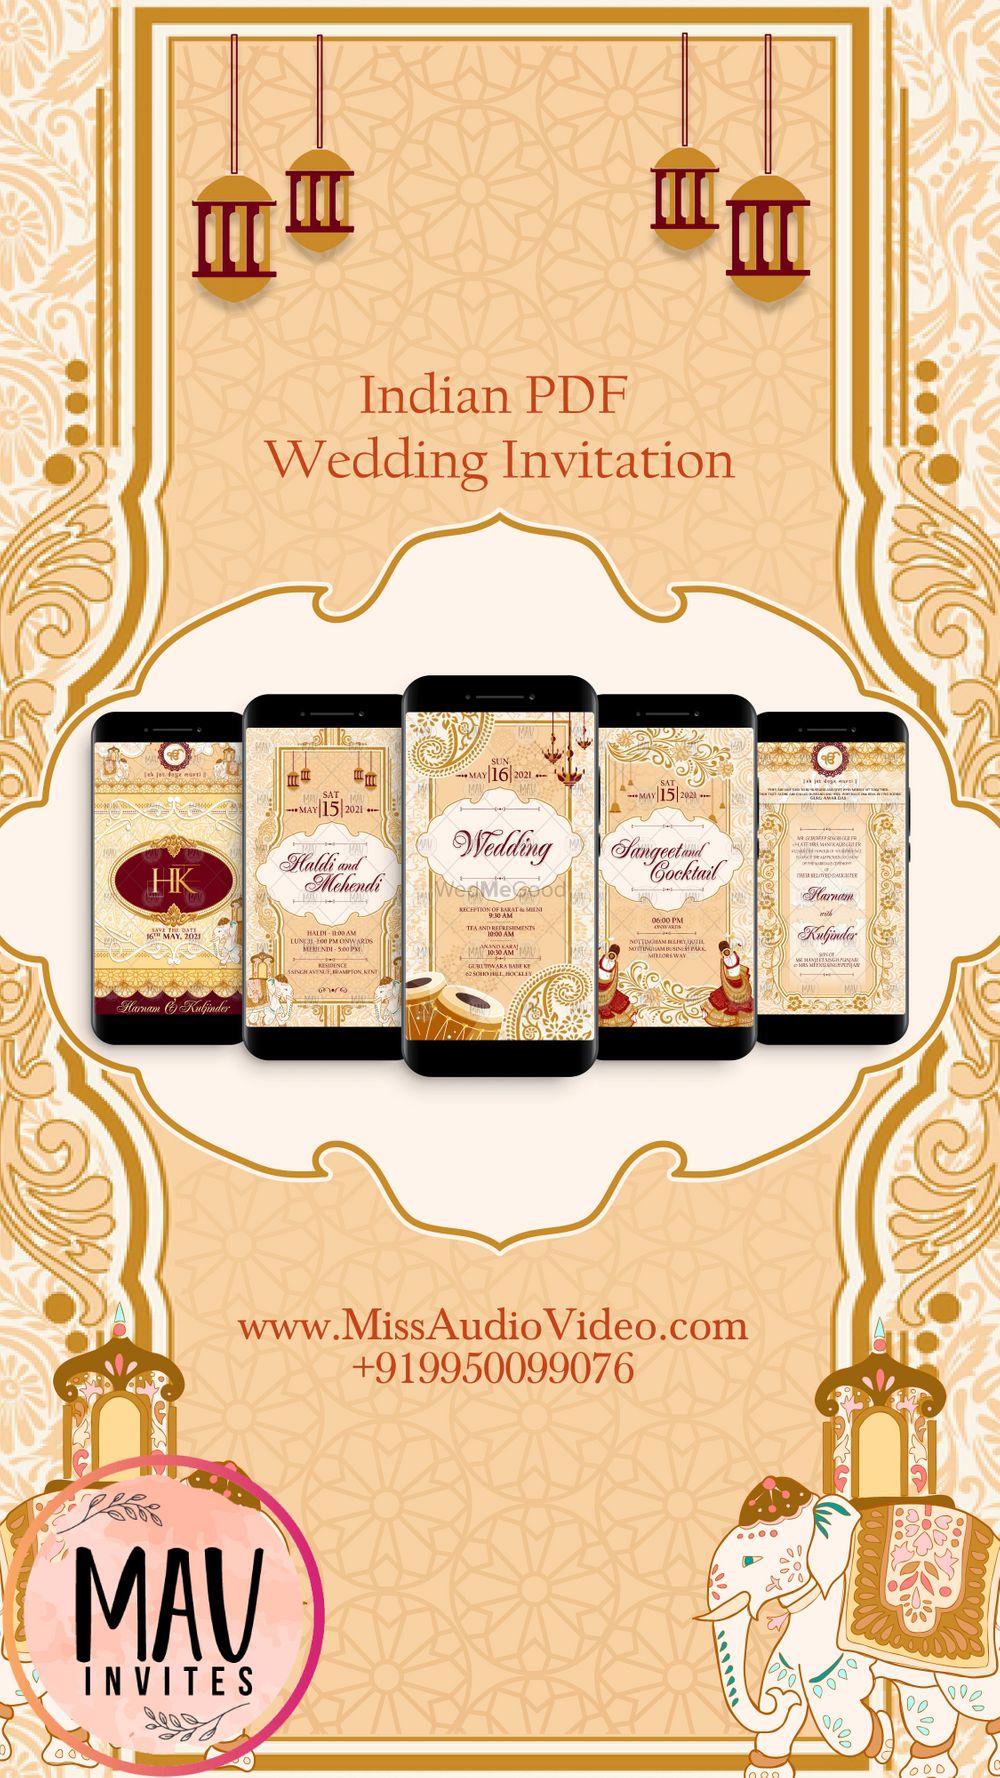 Photo By Miss Audio Video - Invitations